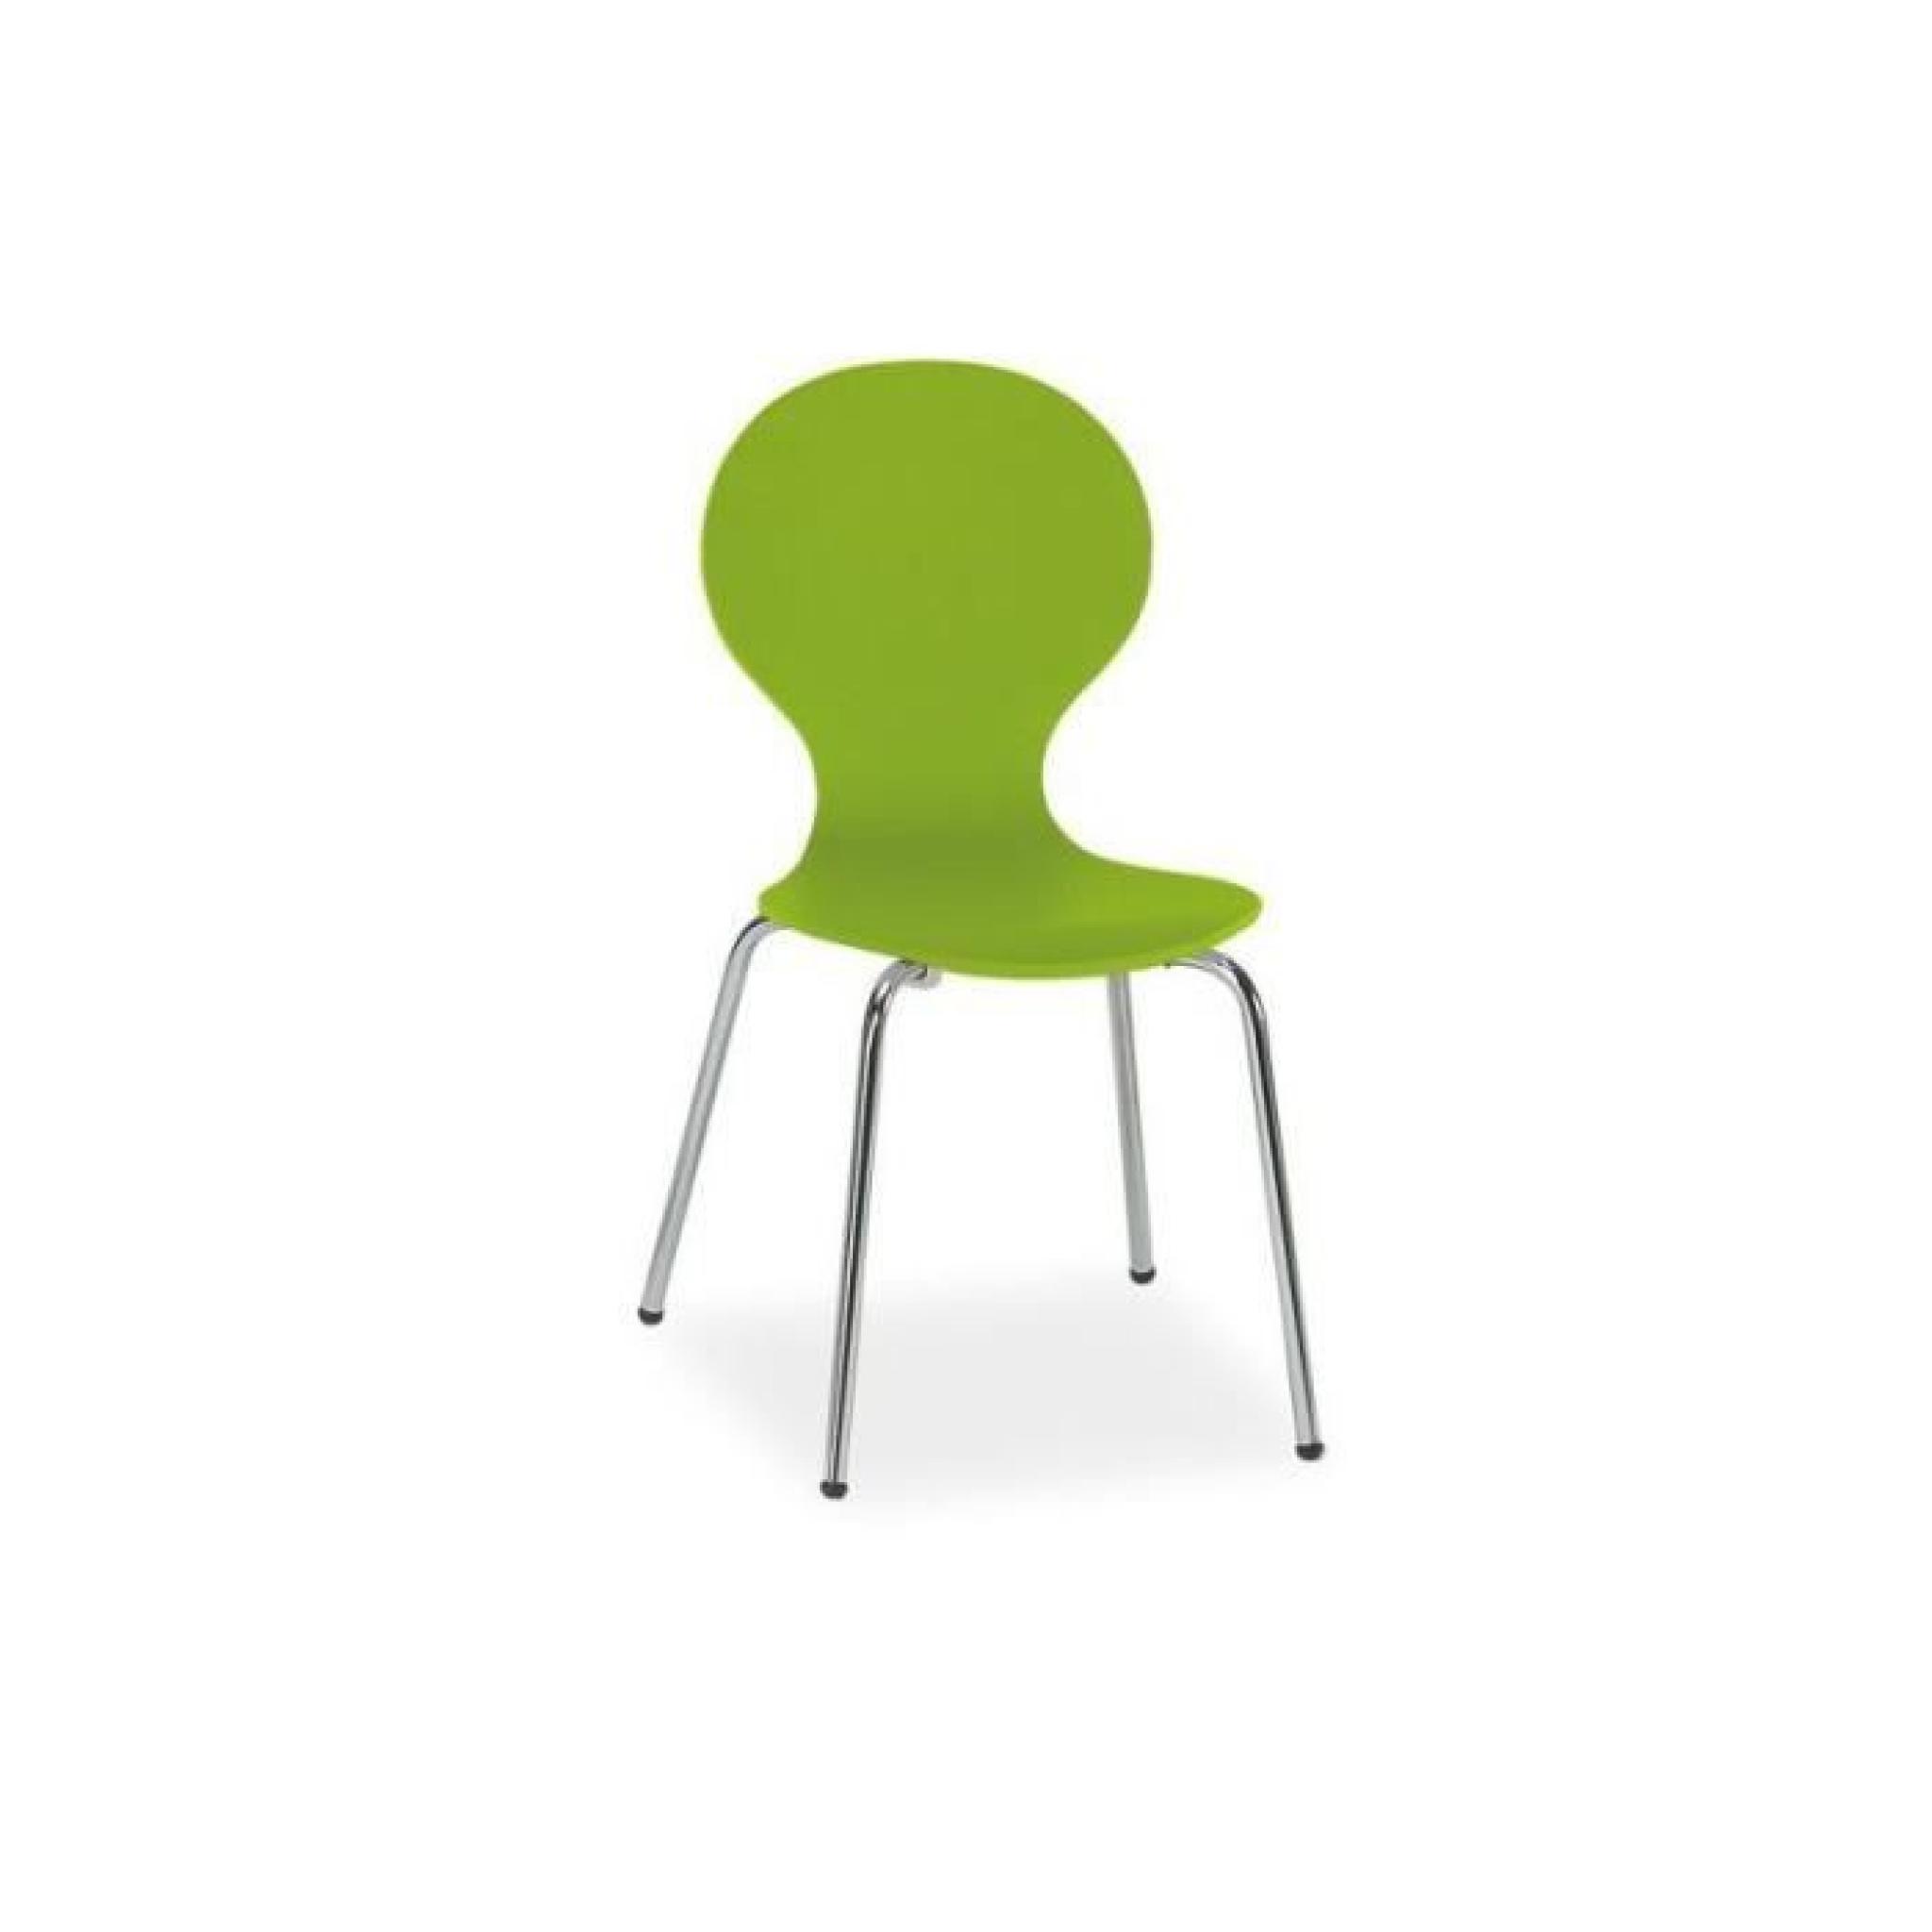 JUSThome W-93 Chaise Vert 86 x 43 x 38